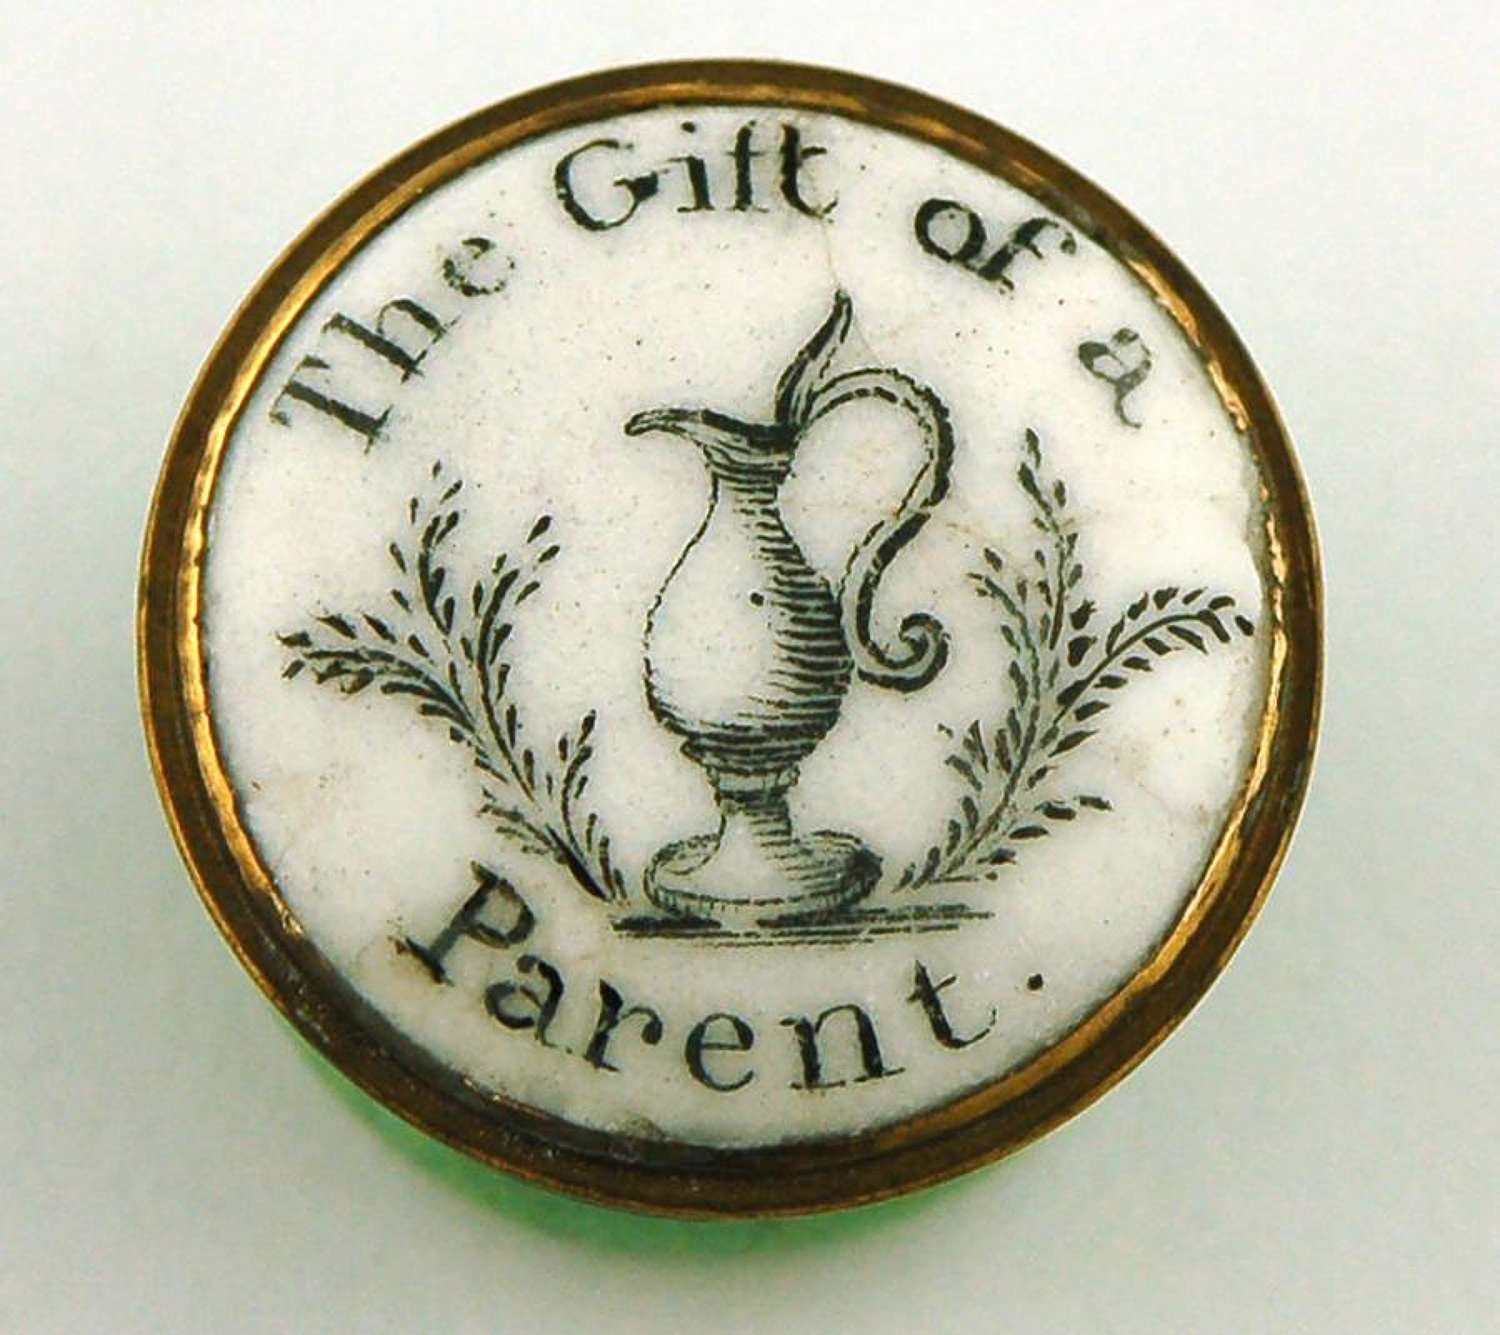 The gift of a parent